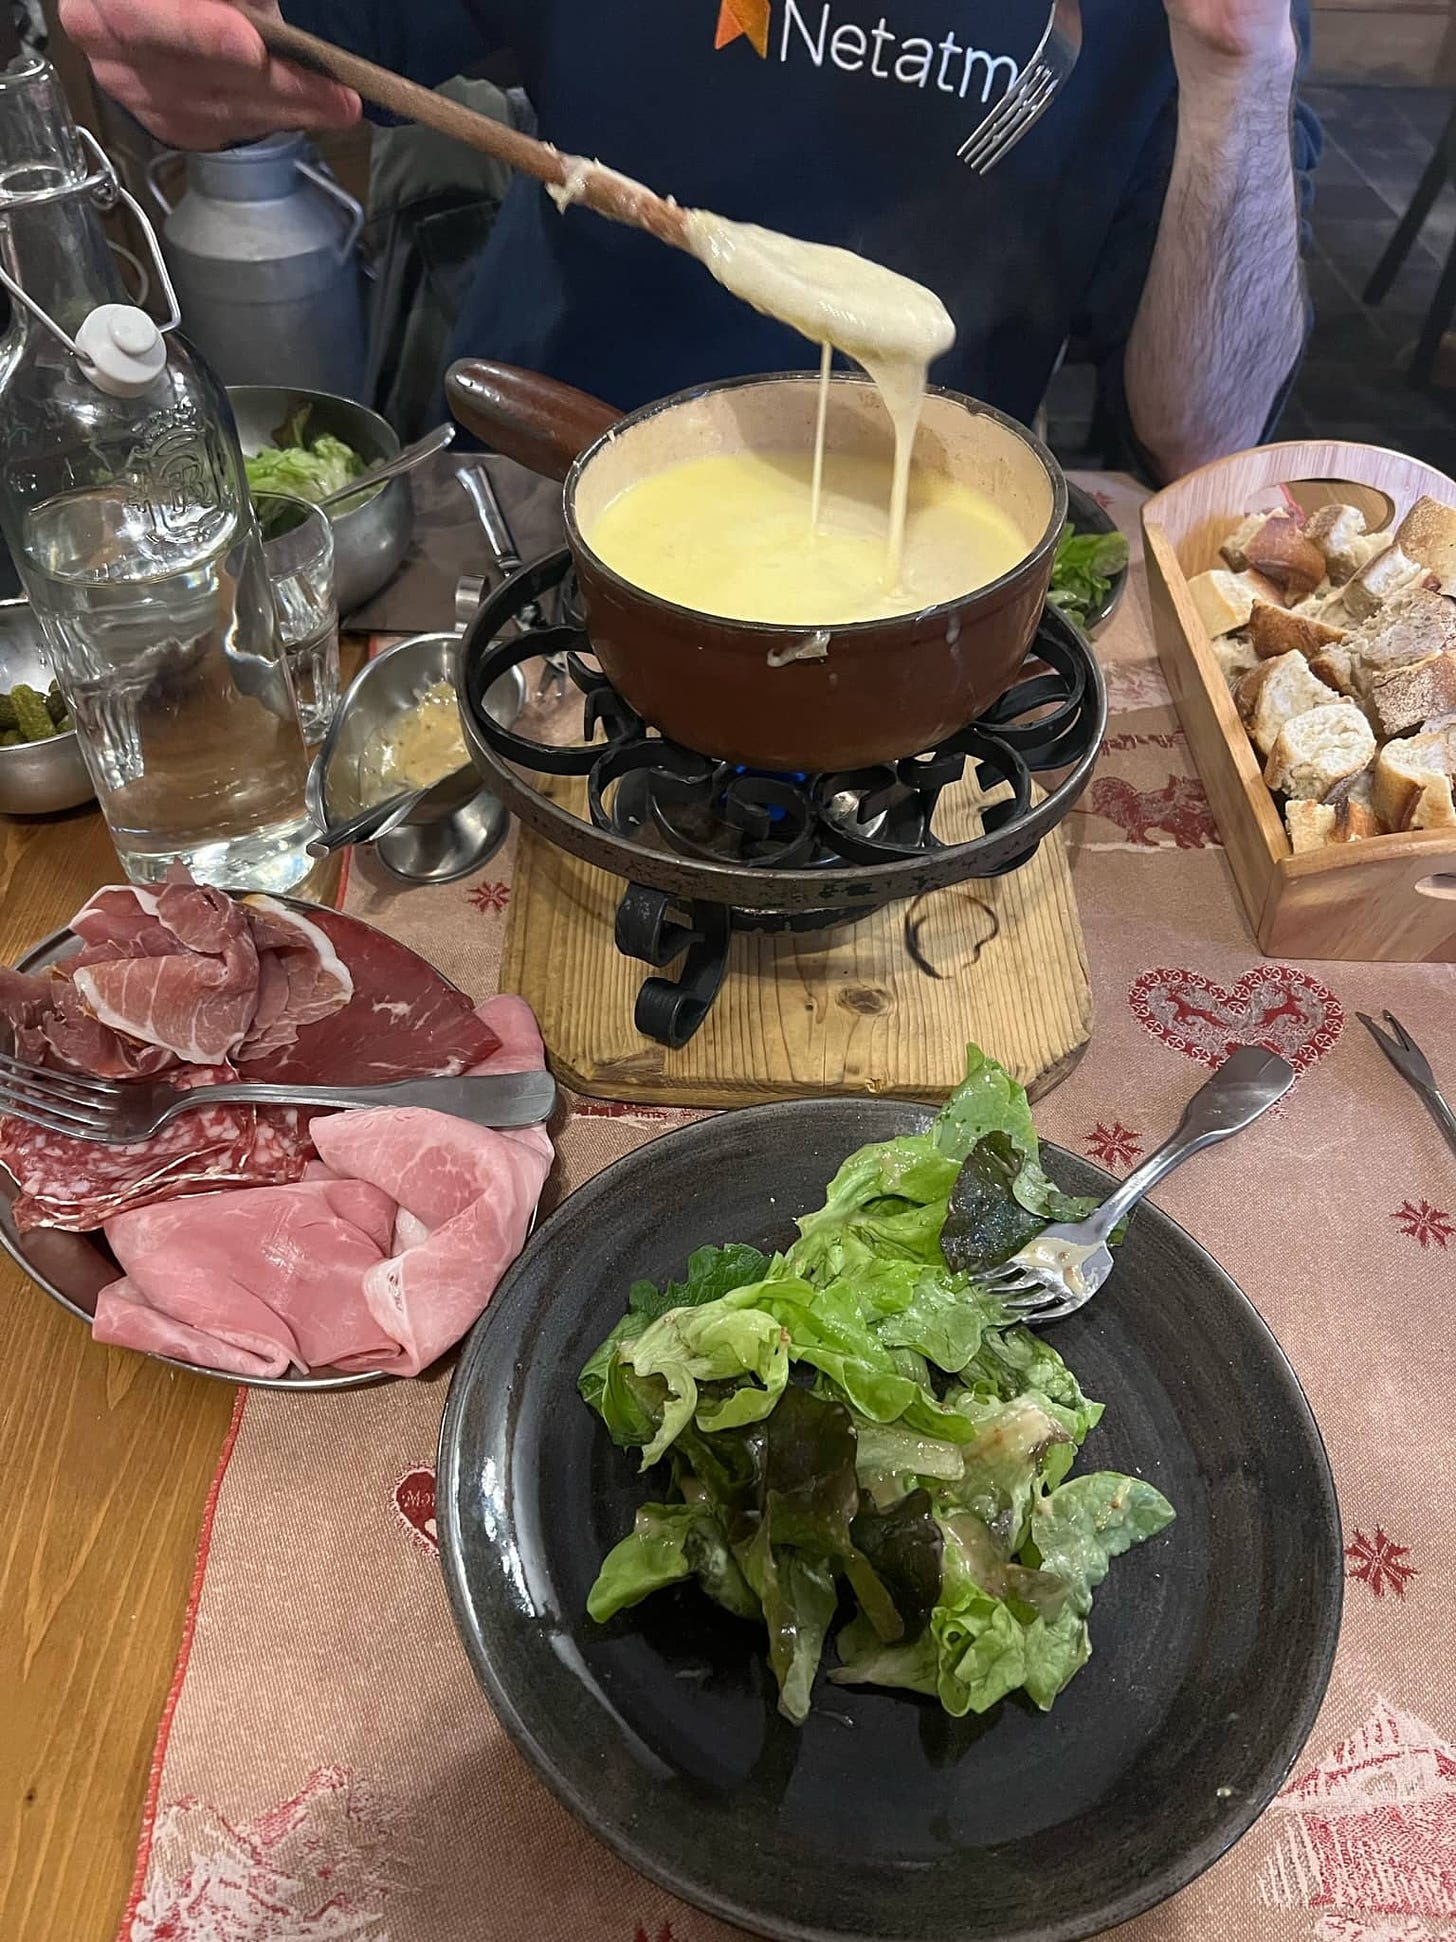 Cheesy fondue with some bread, meat, and salad.